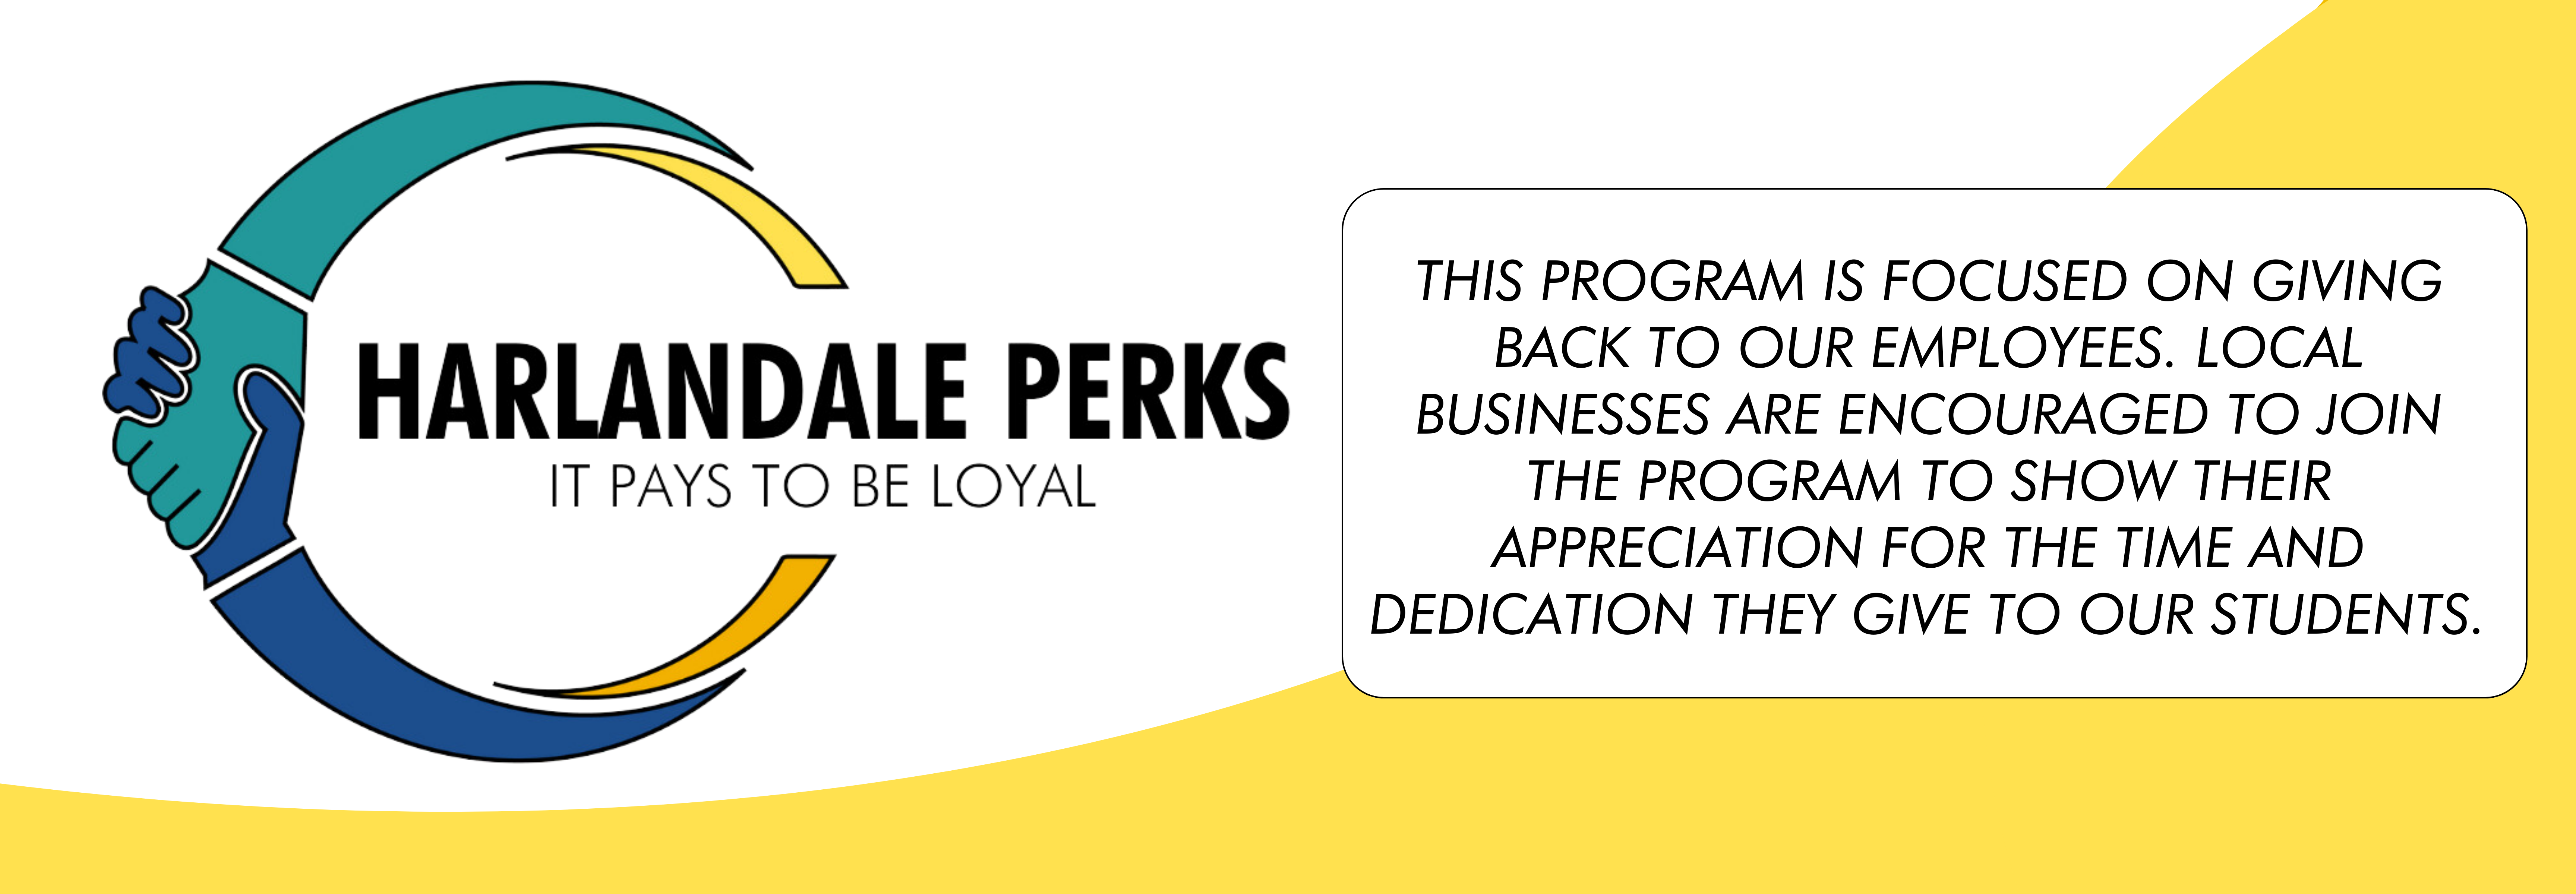 Harlandale Employee Perks: this program is Focused on giving back to our employees. Local businesses are encouraged to join the program to show their appreciation for the time and dedication they give to our students. 